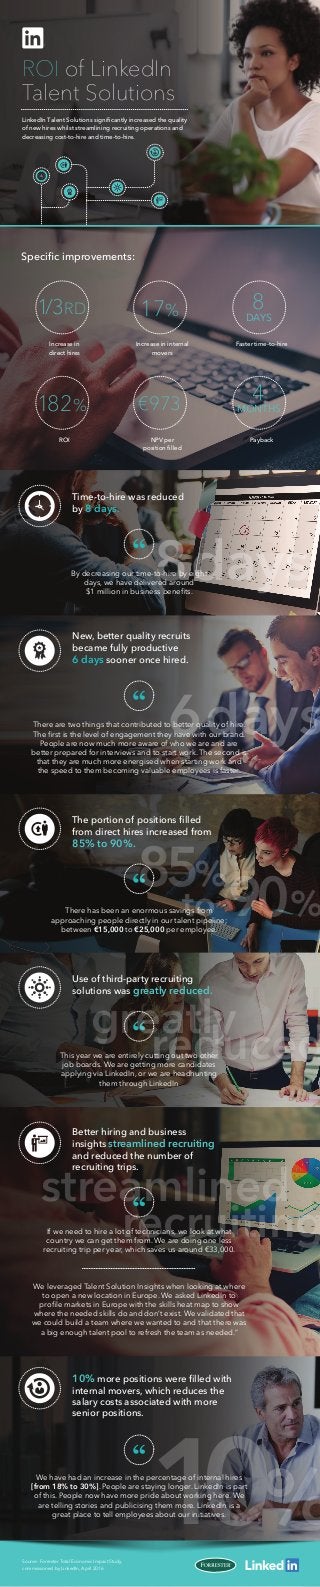 Speciﬁc improvements:
Increase in
direct hires
LinkedIn Talent Solutions signiﬁcantly increased the quality
of new hires whilst streamlining recruiting operations and
decreasing cost-to-hire and time-to-hire.
1/3RD
Increase in internal
movers
17%
Faster time-to-hire
8
DAYS
ROI
182%
NPV per
position ﬁlled
€973
Payback
4
MONTHS
Time-to-hire was reduced
by 8 days.
By decreasing our time-to-hire by eight
days, we have delivered around
$1 million in business beneﬁts.
New, better quality recruits
became fully productive
6 days sooner once hired.
There are two things that contributed to better quality of hire.
The ﬁrst is the level of engagement they have with our brand.
People are now much more aware of who we are and are
better prepared for interviews and to start work. The second is
that they are much more energised when starting work and
the speed to them becoming valuable employees is faster.
ROI of LinkedIn
Talent Solutions
The portion of positions ﬁlled
from direct hires increased from
85% to 90%.
10% more positions were ﬁlled with
internal movers, which reduces the
salary costs associated with more
senior positions.
We have had an increase in the percentage of internal hires
[from 18% to 30%]. People are staying longer. LinkedIn is part
of this. People now have more pride about working here. We
are telling stories and publicising them more. LinkedIn is a
great place to tell employees about our initiatives.
Better hiring and business
insights streamlined recruiting
and reduced the number of
recruiting trips.
If we need to hire a lot of technicians, we look at what
country we can get them from. We are doing one less
recruiting trip per year, which saves us around €33,000.
We leveraged Talent Solution Insights when looking at where
to open a new location in Europe. We asked LinkedIn to
proﬁle markets in Europe with the skills heat map to show
where the needed skills do and don’t exist. We validated that
we could build a team where we wanted to and that there was
a big enough talent pool to refresh the team as needed.”
Source: Forrester Total Economic Impact Study,
commissioned by LinkedIn, April 2016
Use of third-party recruiting
solutions was greatly reduced.
This year we are entirely cutting out two other
job boards. We are getting more candidates
applying via LinkedIn, or we are headhunting
them through LinkedIn
10%
streamlined
recruiting
greatly
reduced
85%
to 90%
6days
8days
There has been an enormous savings from
approaching people directly in our talent pipeline;
between €15,000 to €25,000 per employee.
 